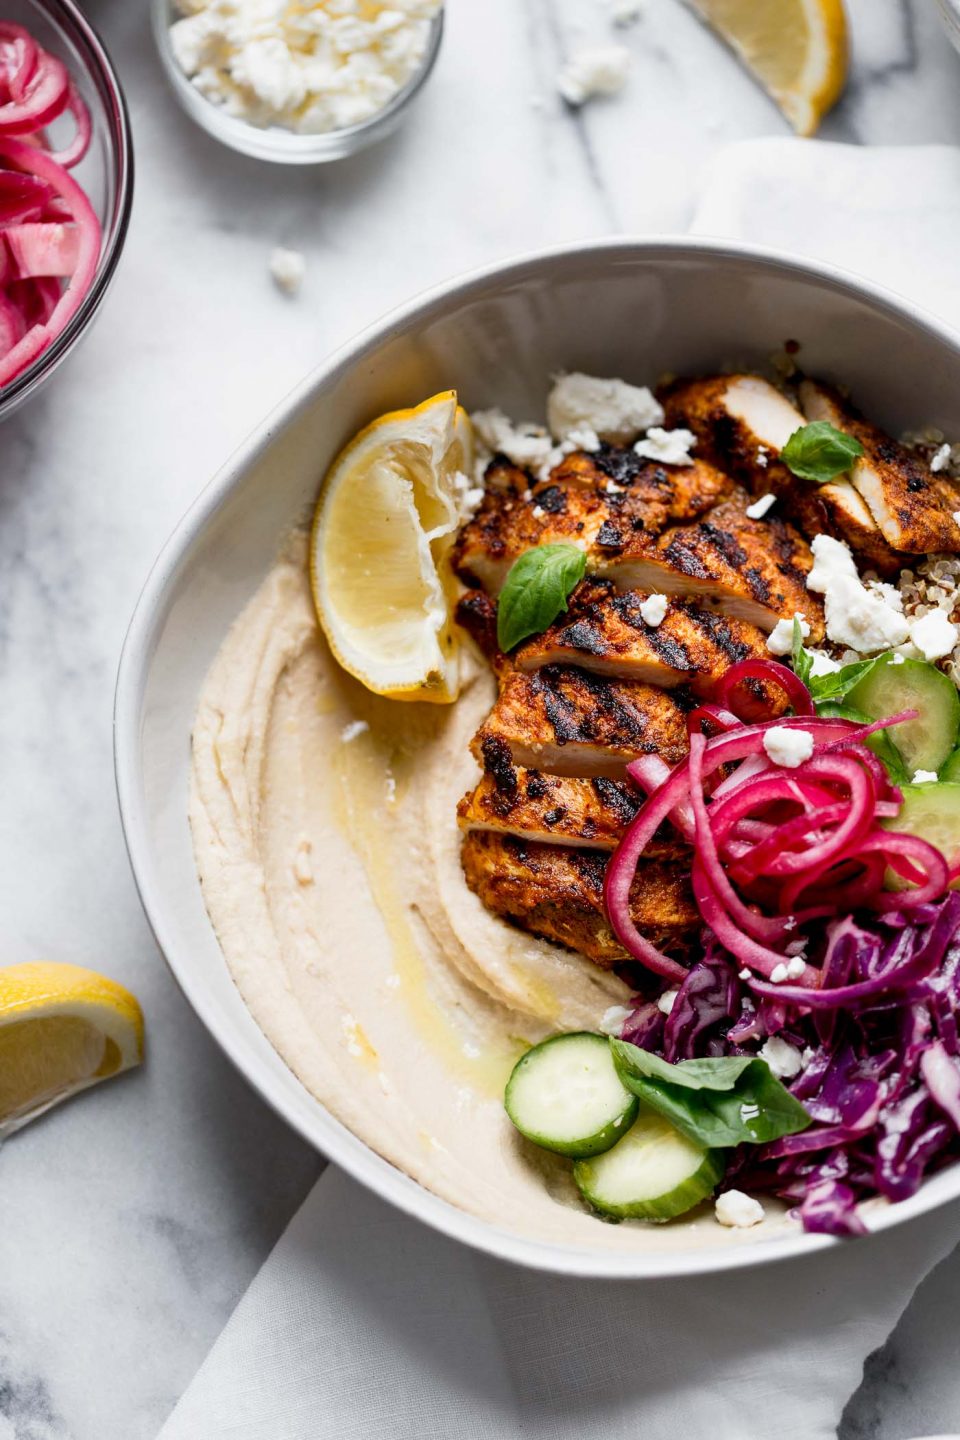 healthy & hearty grilled chicken shawarma hummus bowls!!! a generous dollop of hummus gets served with quinoa, a light red cabbage slaw, feta, & grilled chicken shawarma. a healthy & easy weeknight dinner, or an easy meal to prep for grab-&-go lunches this week! #playswellwtihbutter #hummusbowls #chickenshawarma #chickenshawarma #healthyrecipe #easyrecipe #mealprep #bowlrecipe